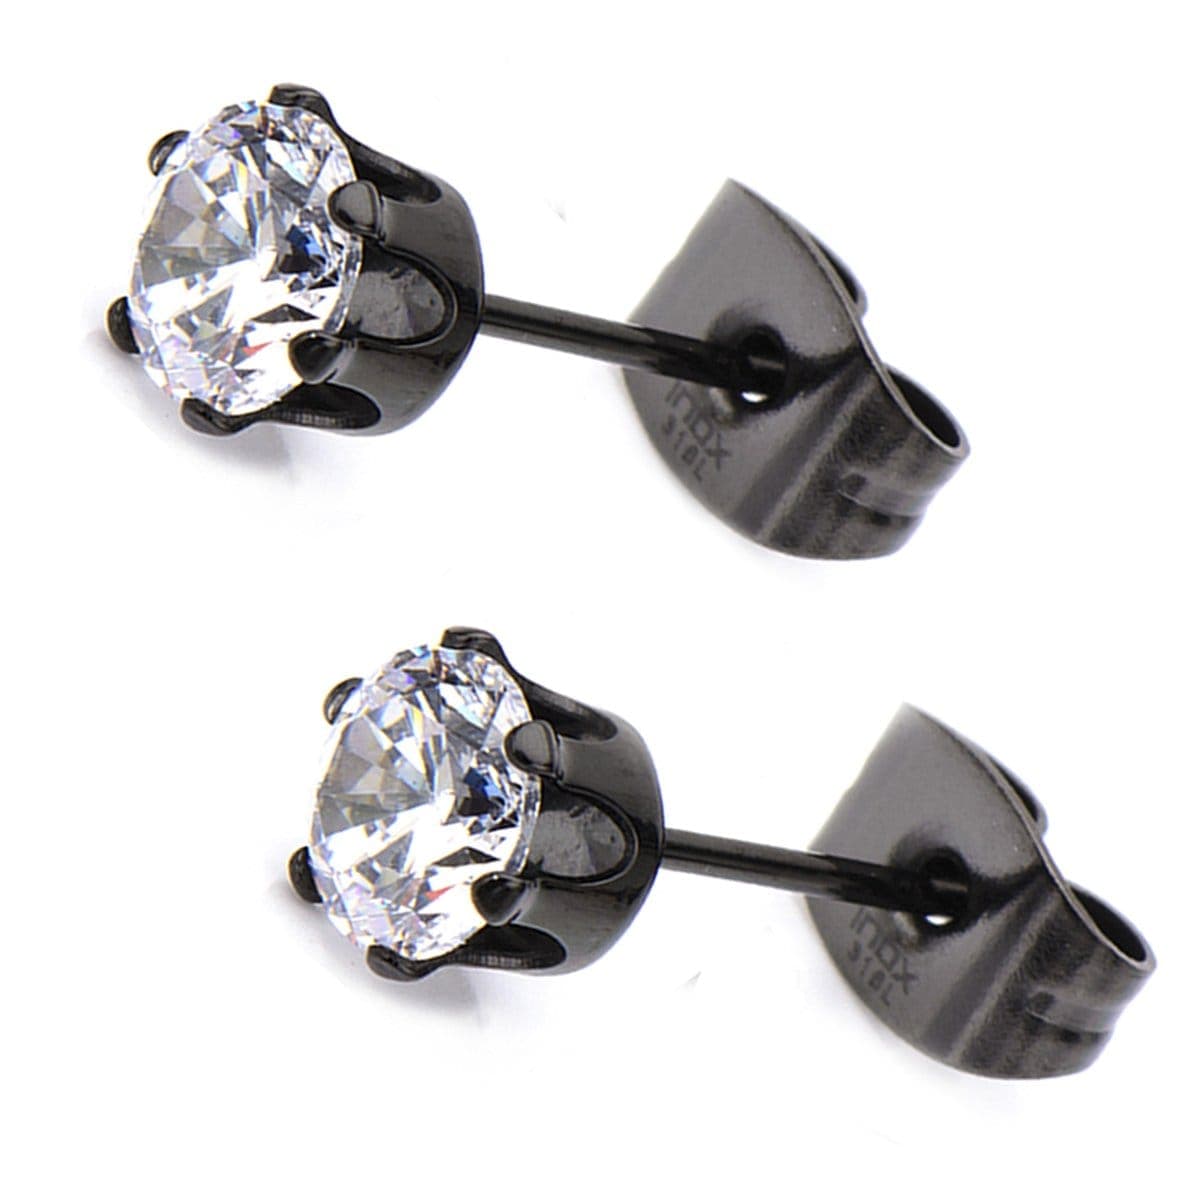 INOX JEWELRY Earrings Black Stainless Steel Six Prong CZ Solitaire Studs